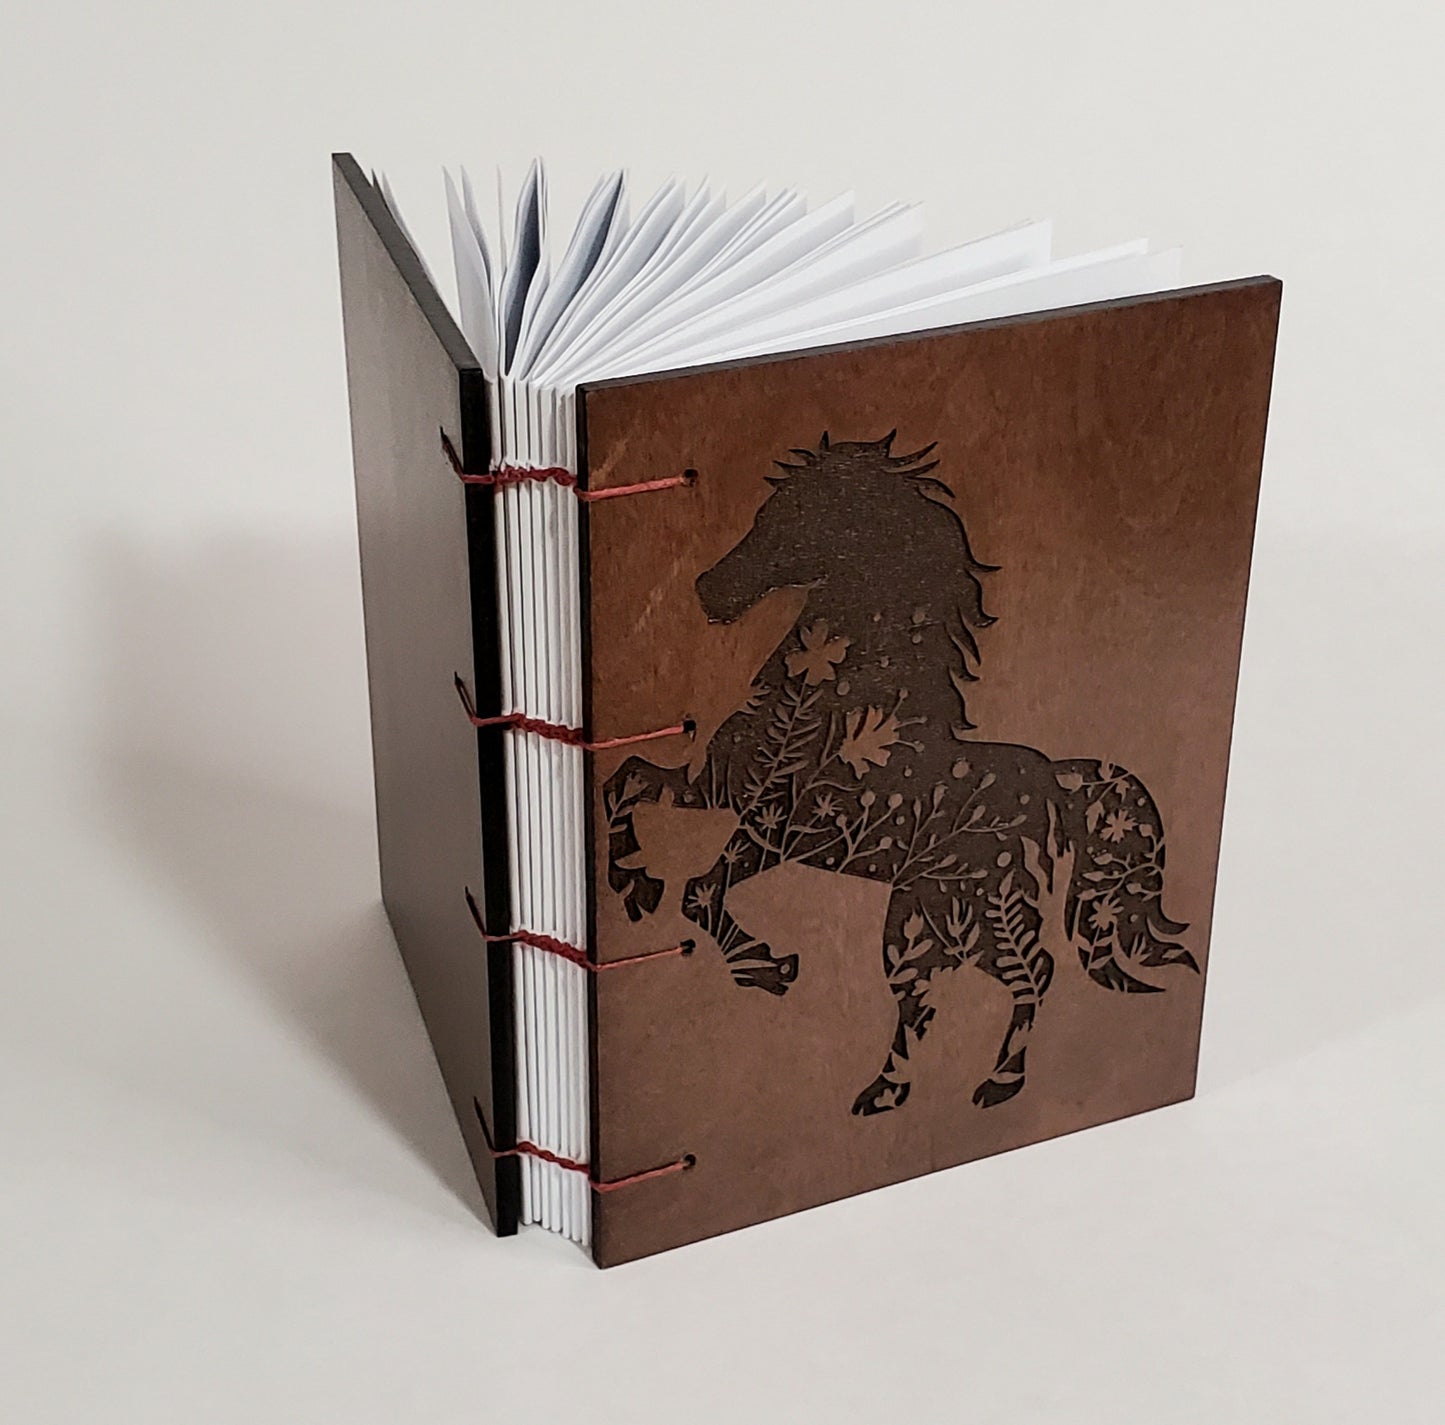 Engraved Coptic bound lined page notebooks